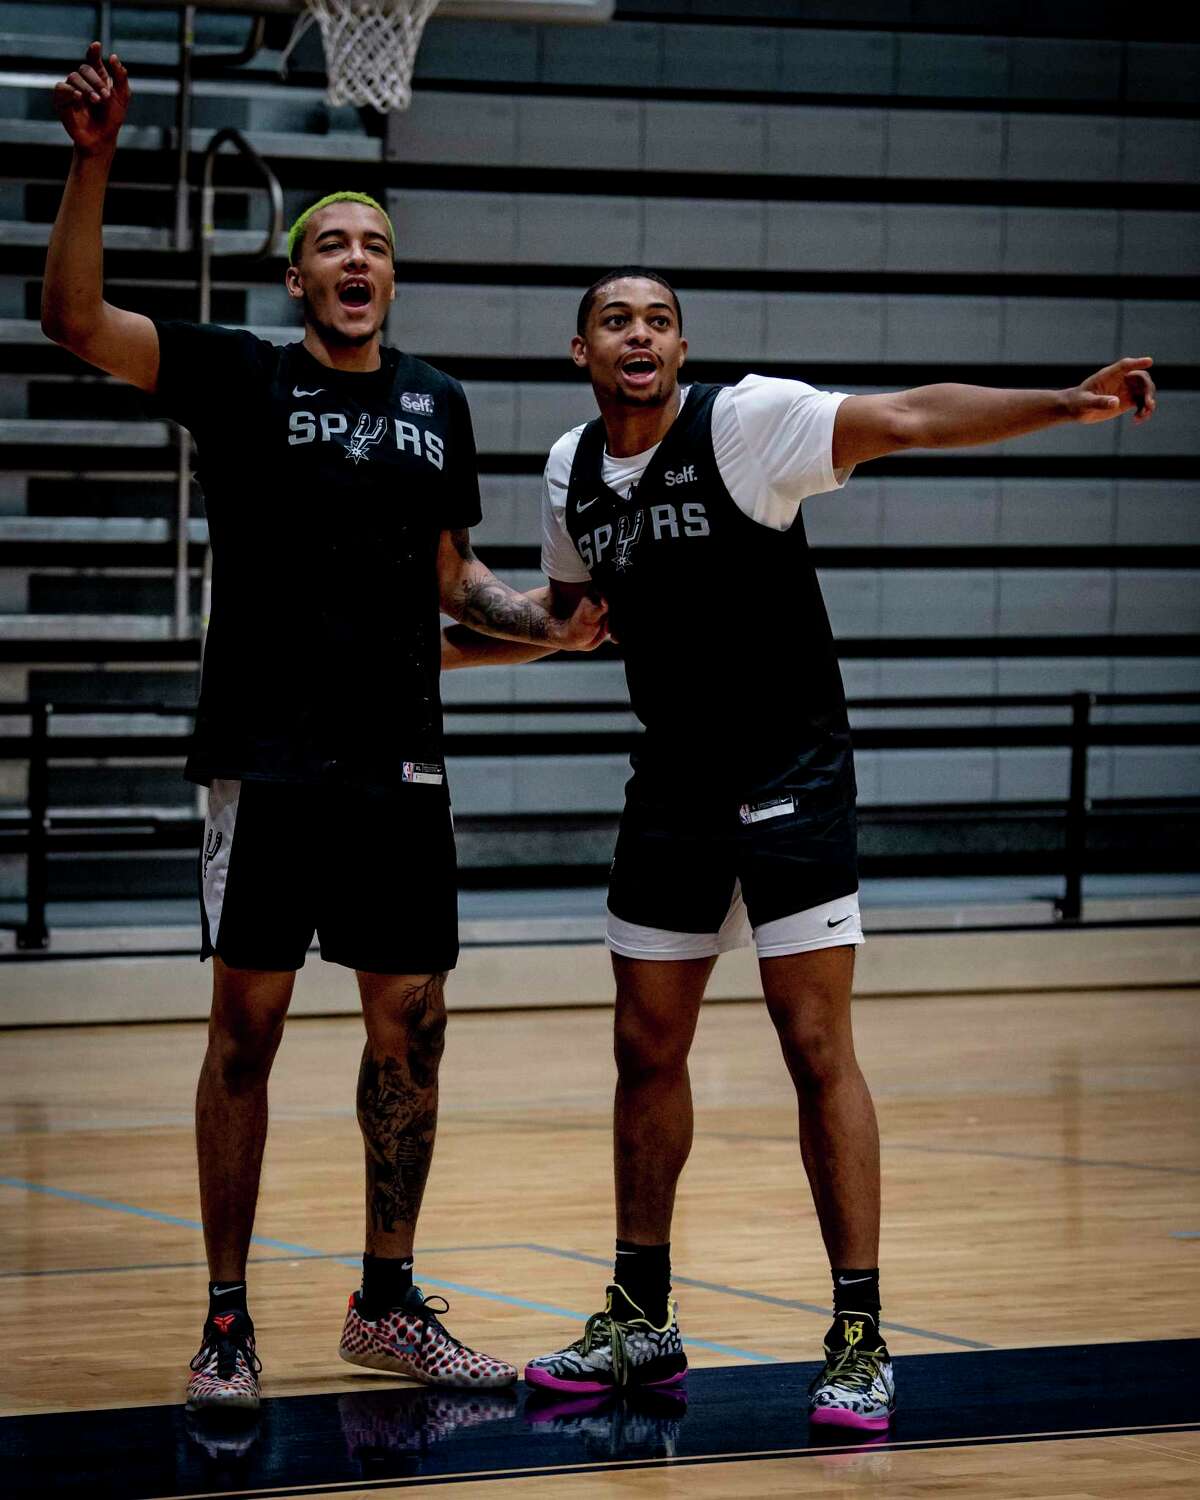 January 2, 2023, New York, NY: San Antonio Spurs forward Jeremy Sochan and San Antonio Spurs guard Keldon Johnson talk as they look to celebrate a drill win during shoot around before the game against the Brooklyn Nets at Baruch College in New York, New YorkMonday, January 2, 2023. (Photo by Reginald Thomas II/San Antonio Spurs)